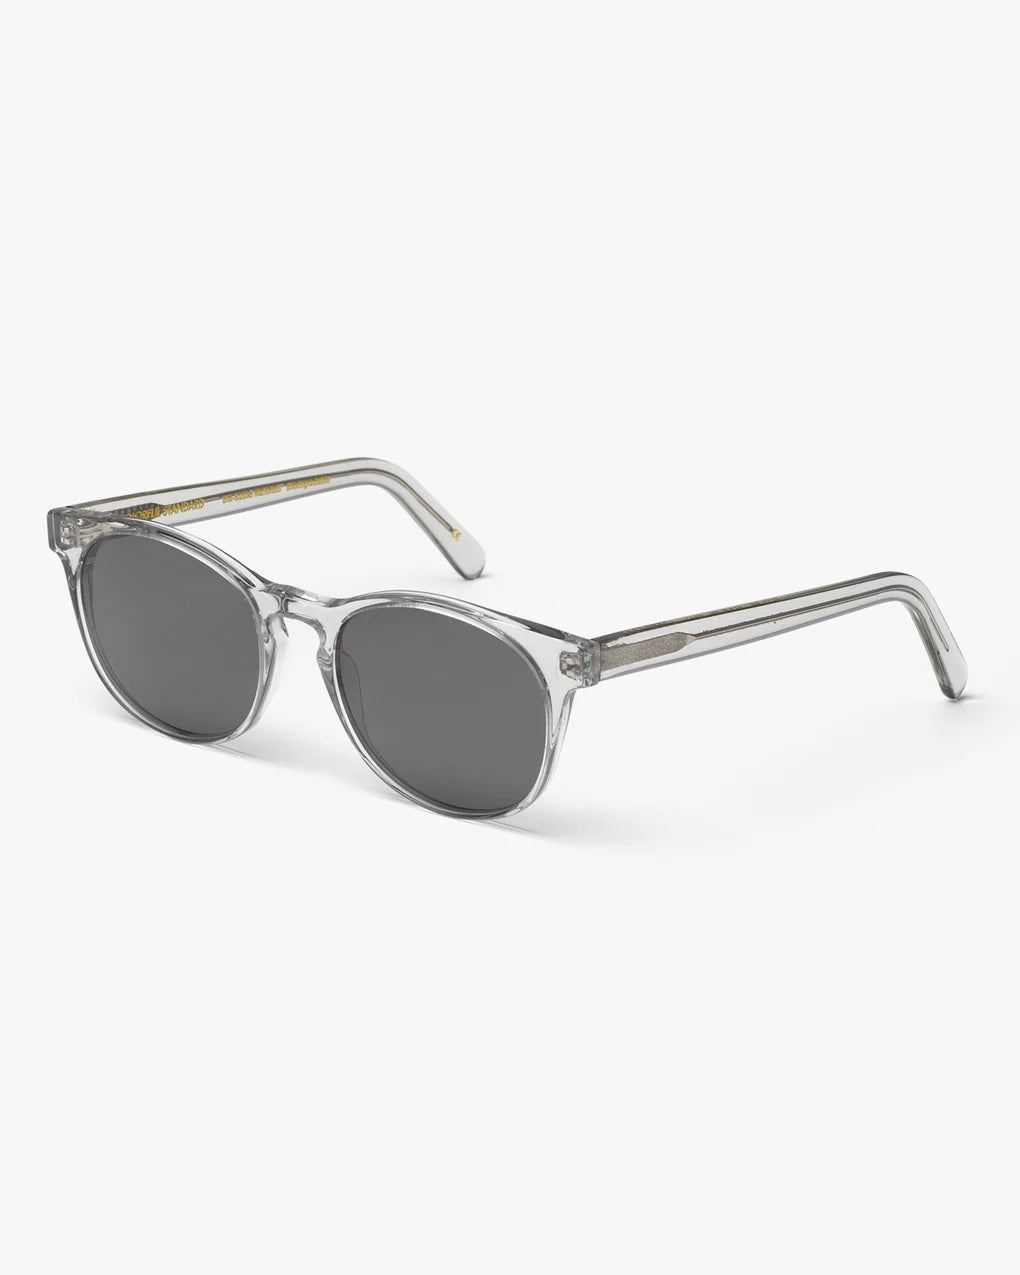 A Colorful Standard Sunglass 15 - Storm Grey frame on a white background.